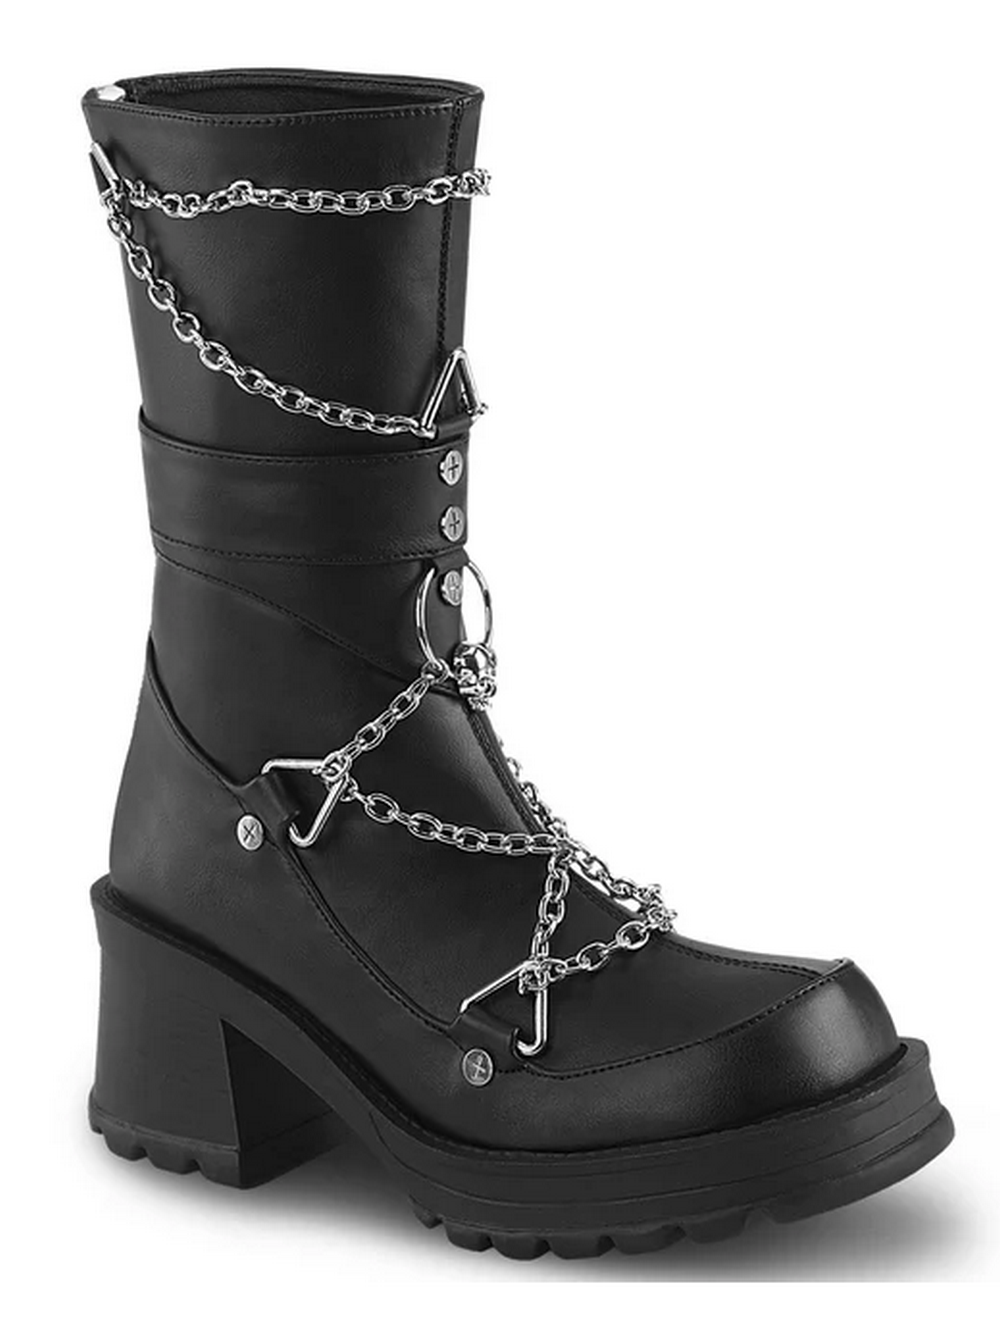 DEMONIA Women's Black Mid-Calf Boots with Chain Accents